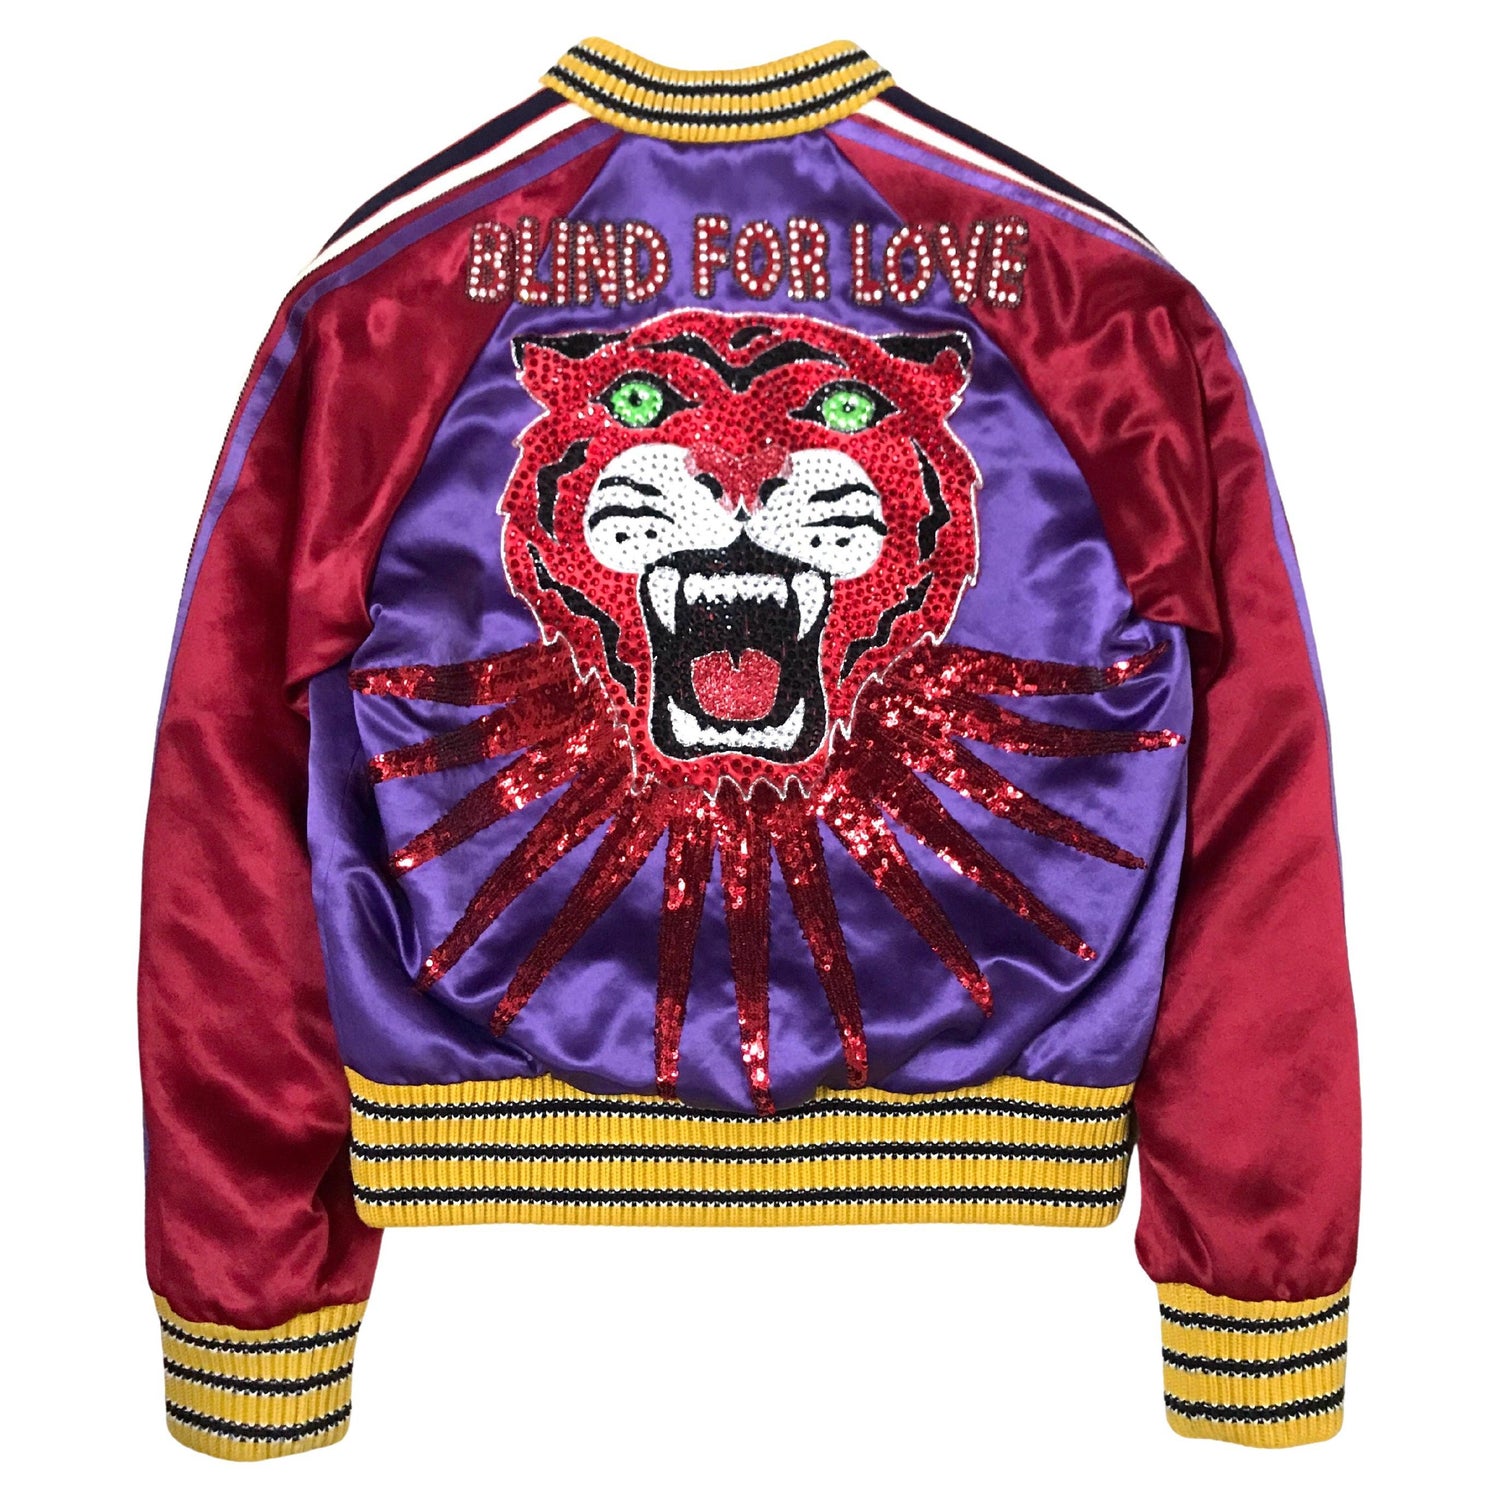 Gucci Tiger Jacket - 15 For Sale on 1stDibs | gucci tiger bomber jacket, gucci  bomber jacket tiger, tiger jacket gucci